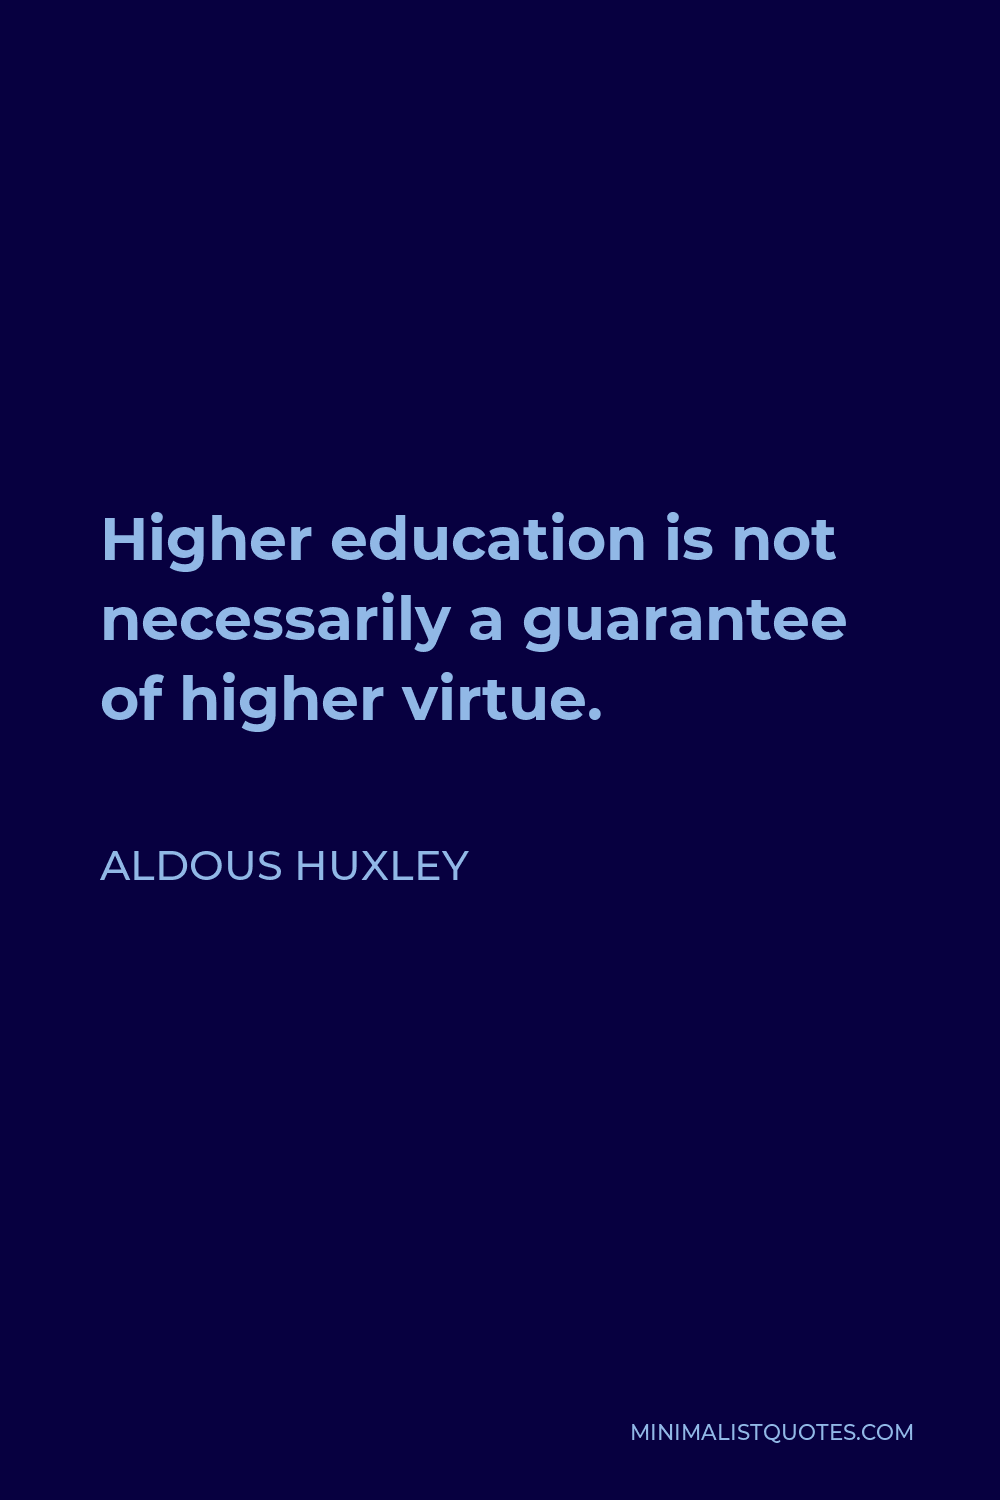 Aldous Huxley Quote - Higher education is not necessarily a guarantee of higher virtue.